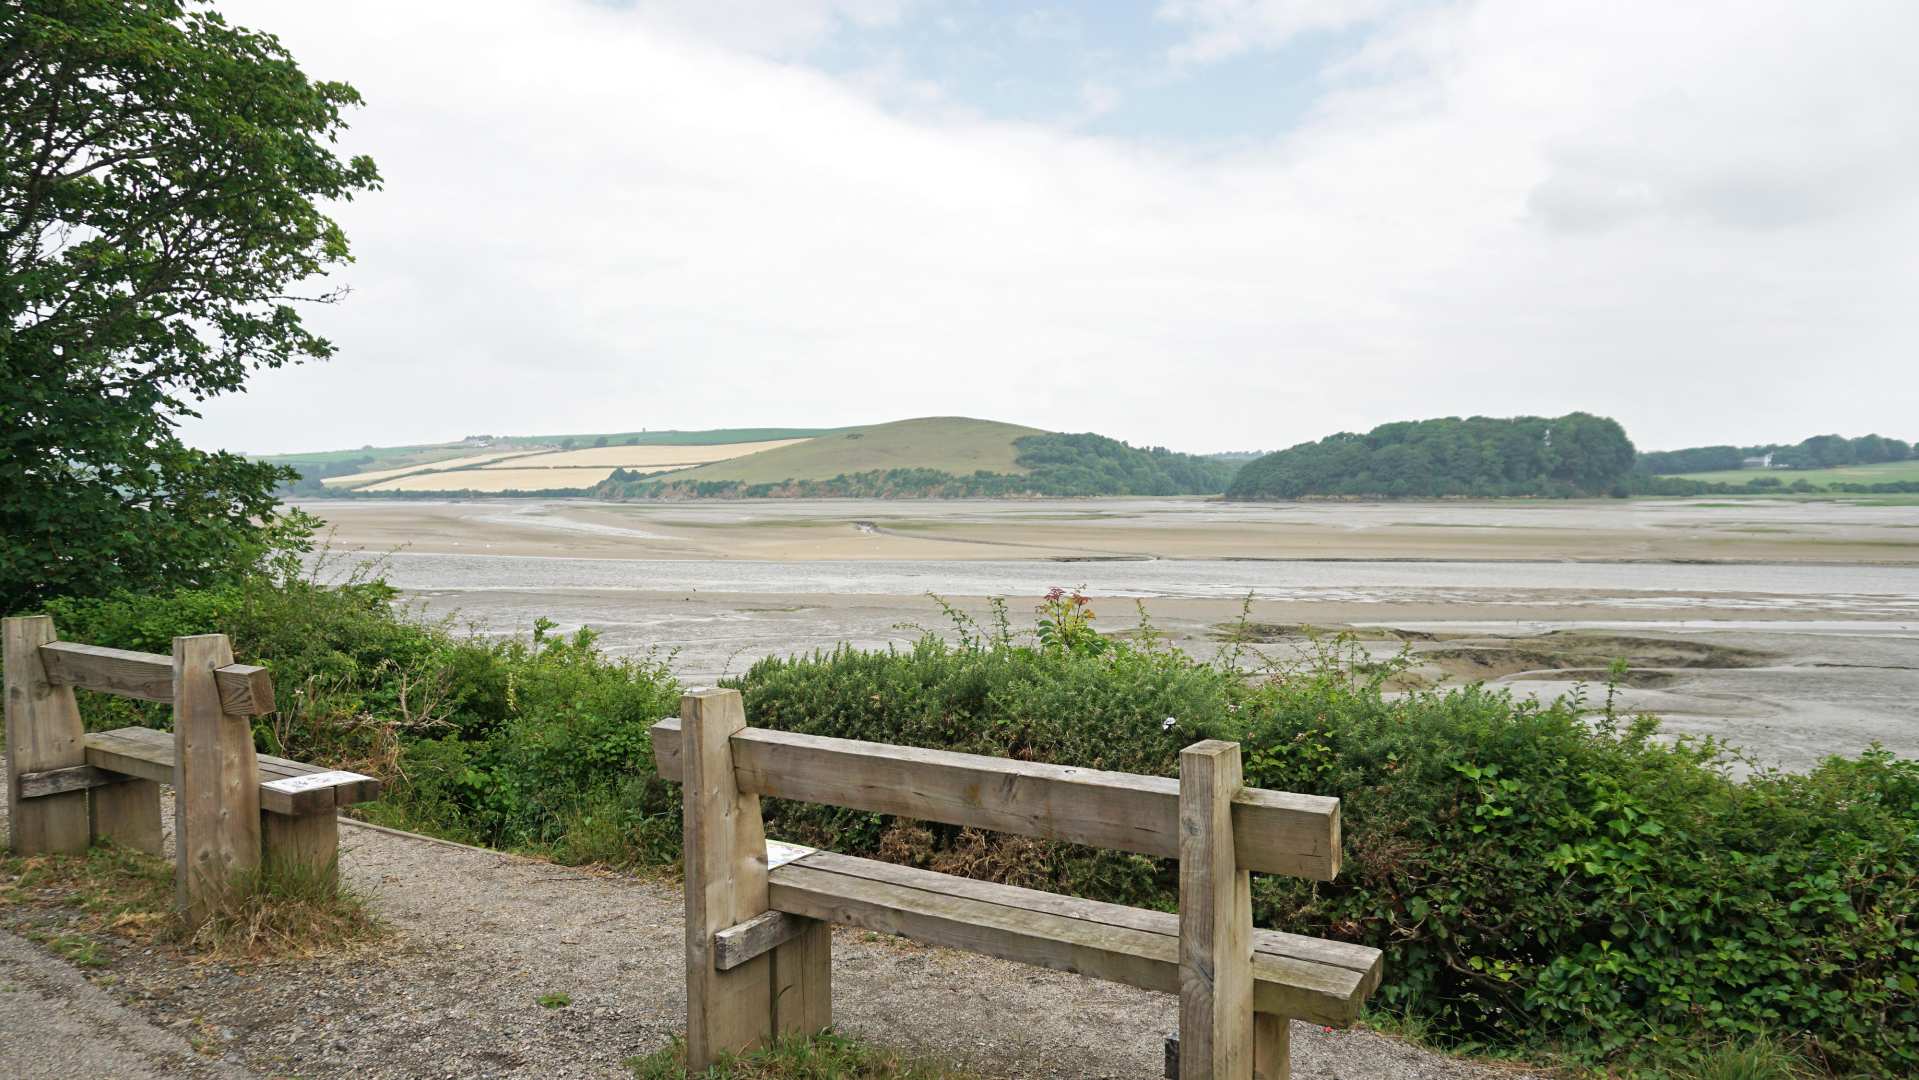 Resting Bench near Padstow - Resting Bench near Padstow